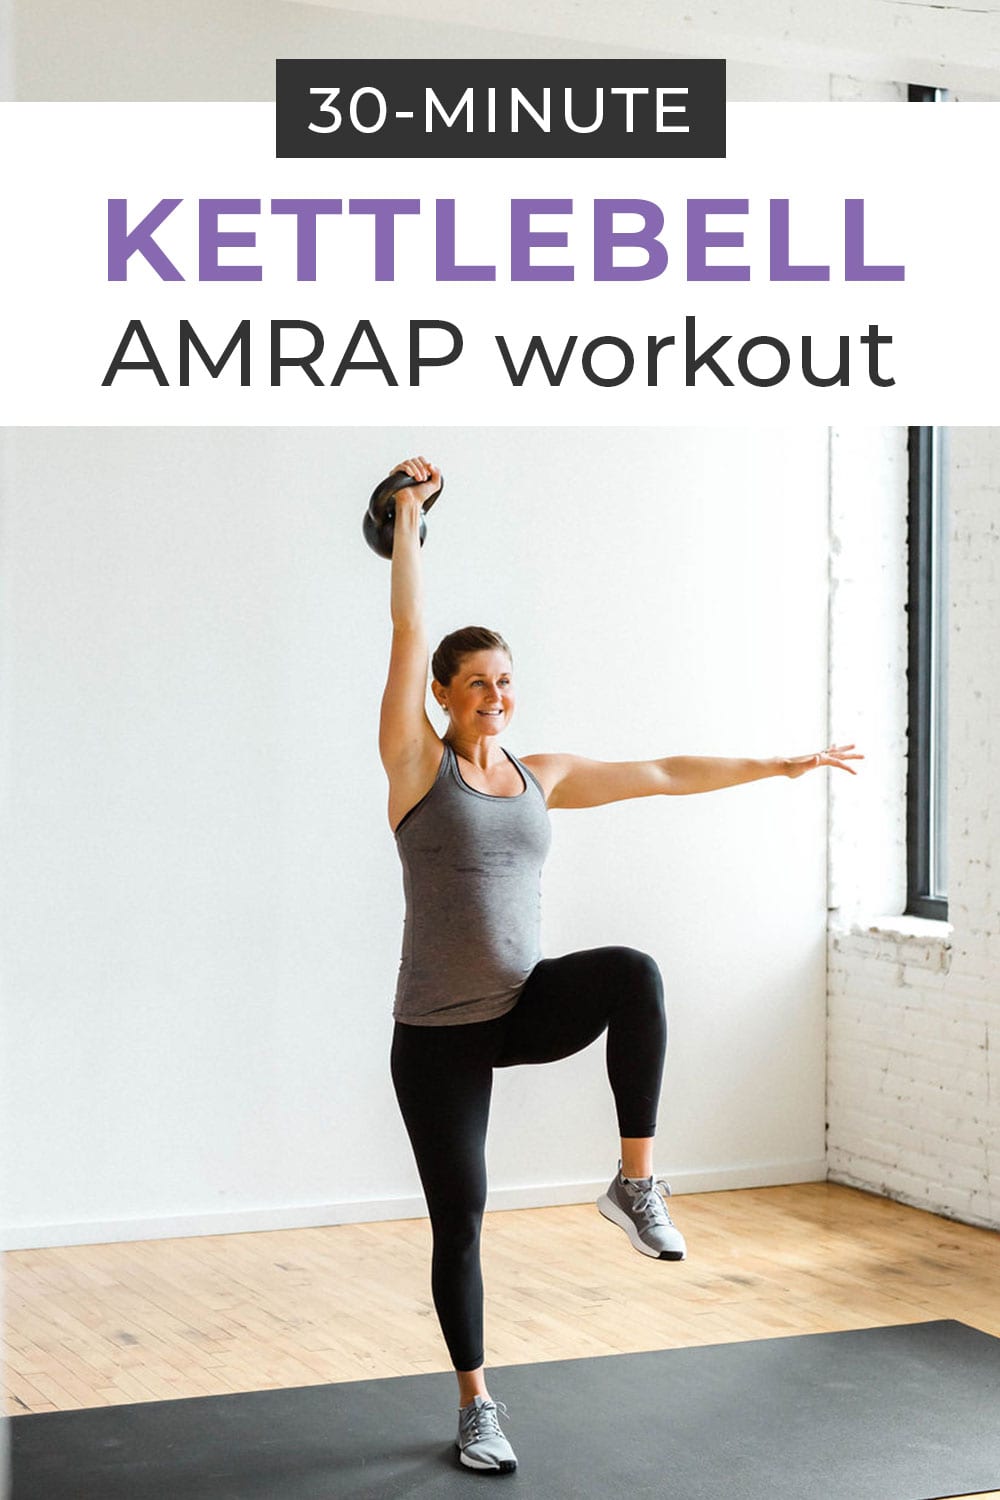 6 Day Amrap workout routines for push your ABS